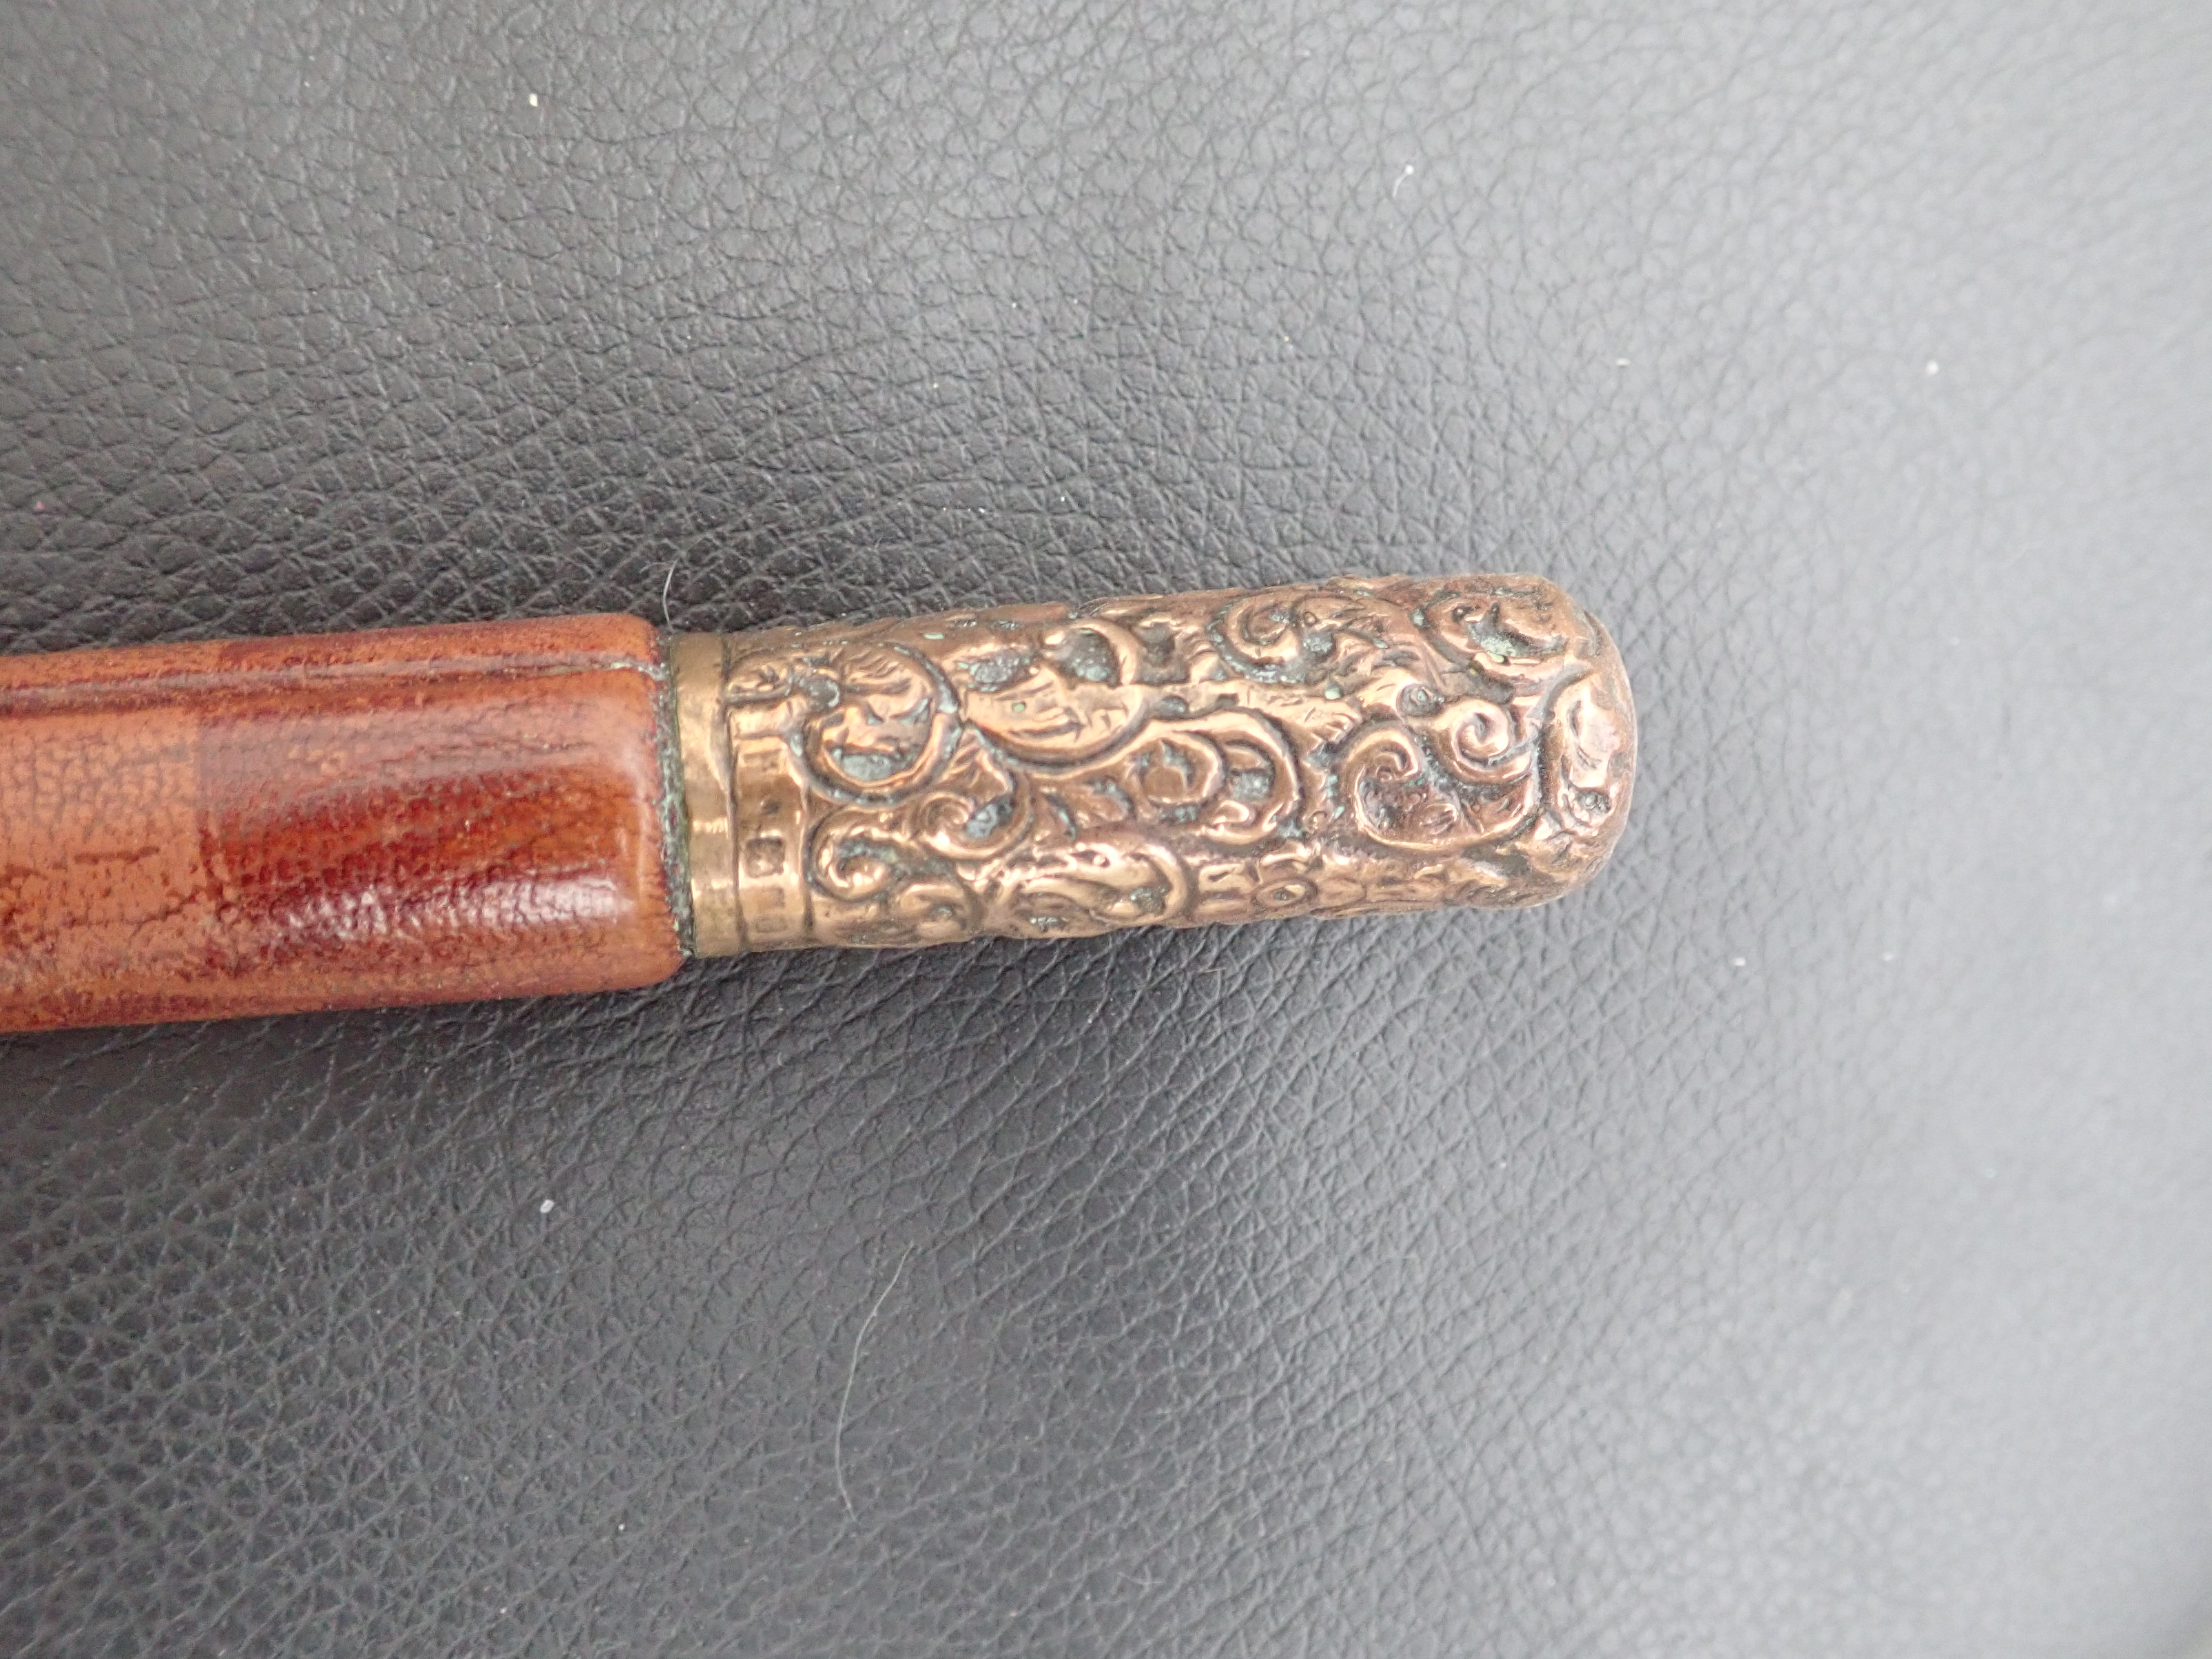 Vintage holly whip in original condition with decorative ferrule and butt - Image 3 of 4